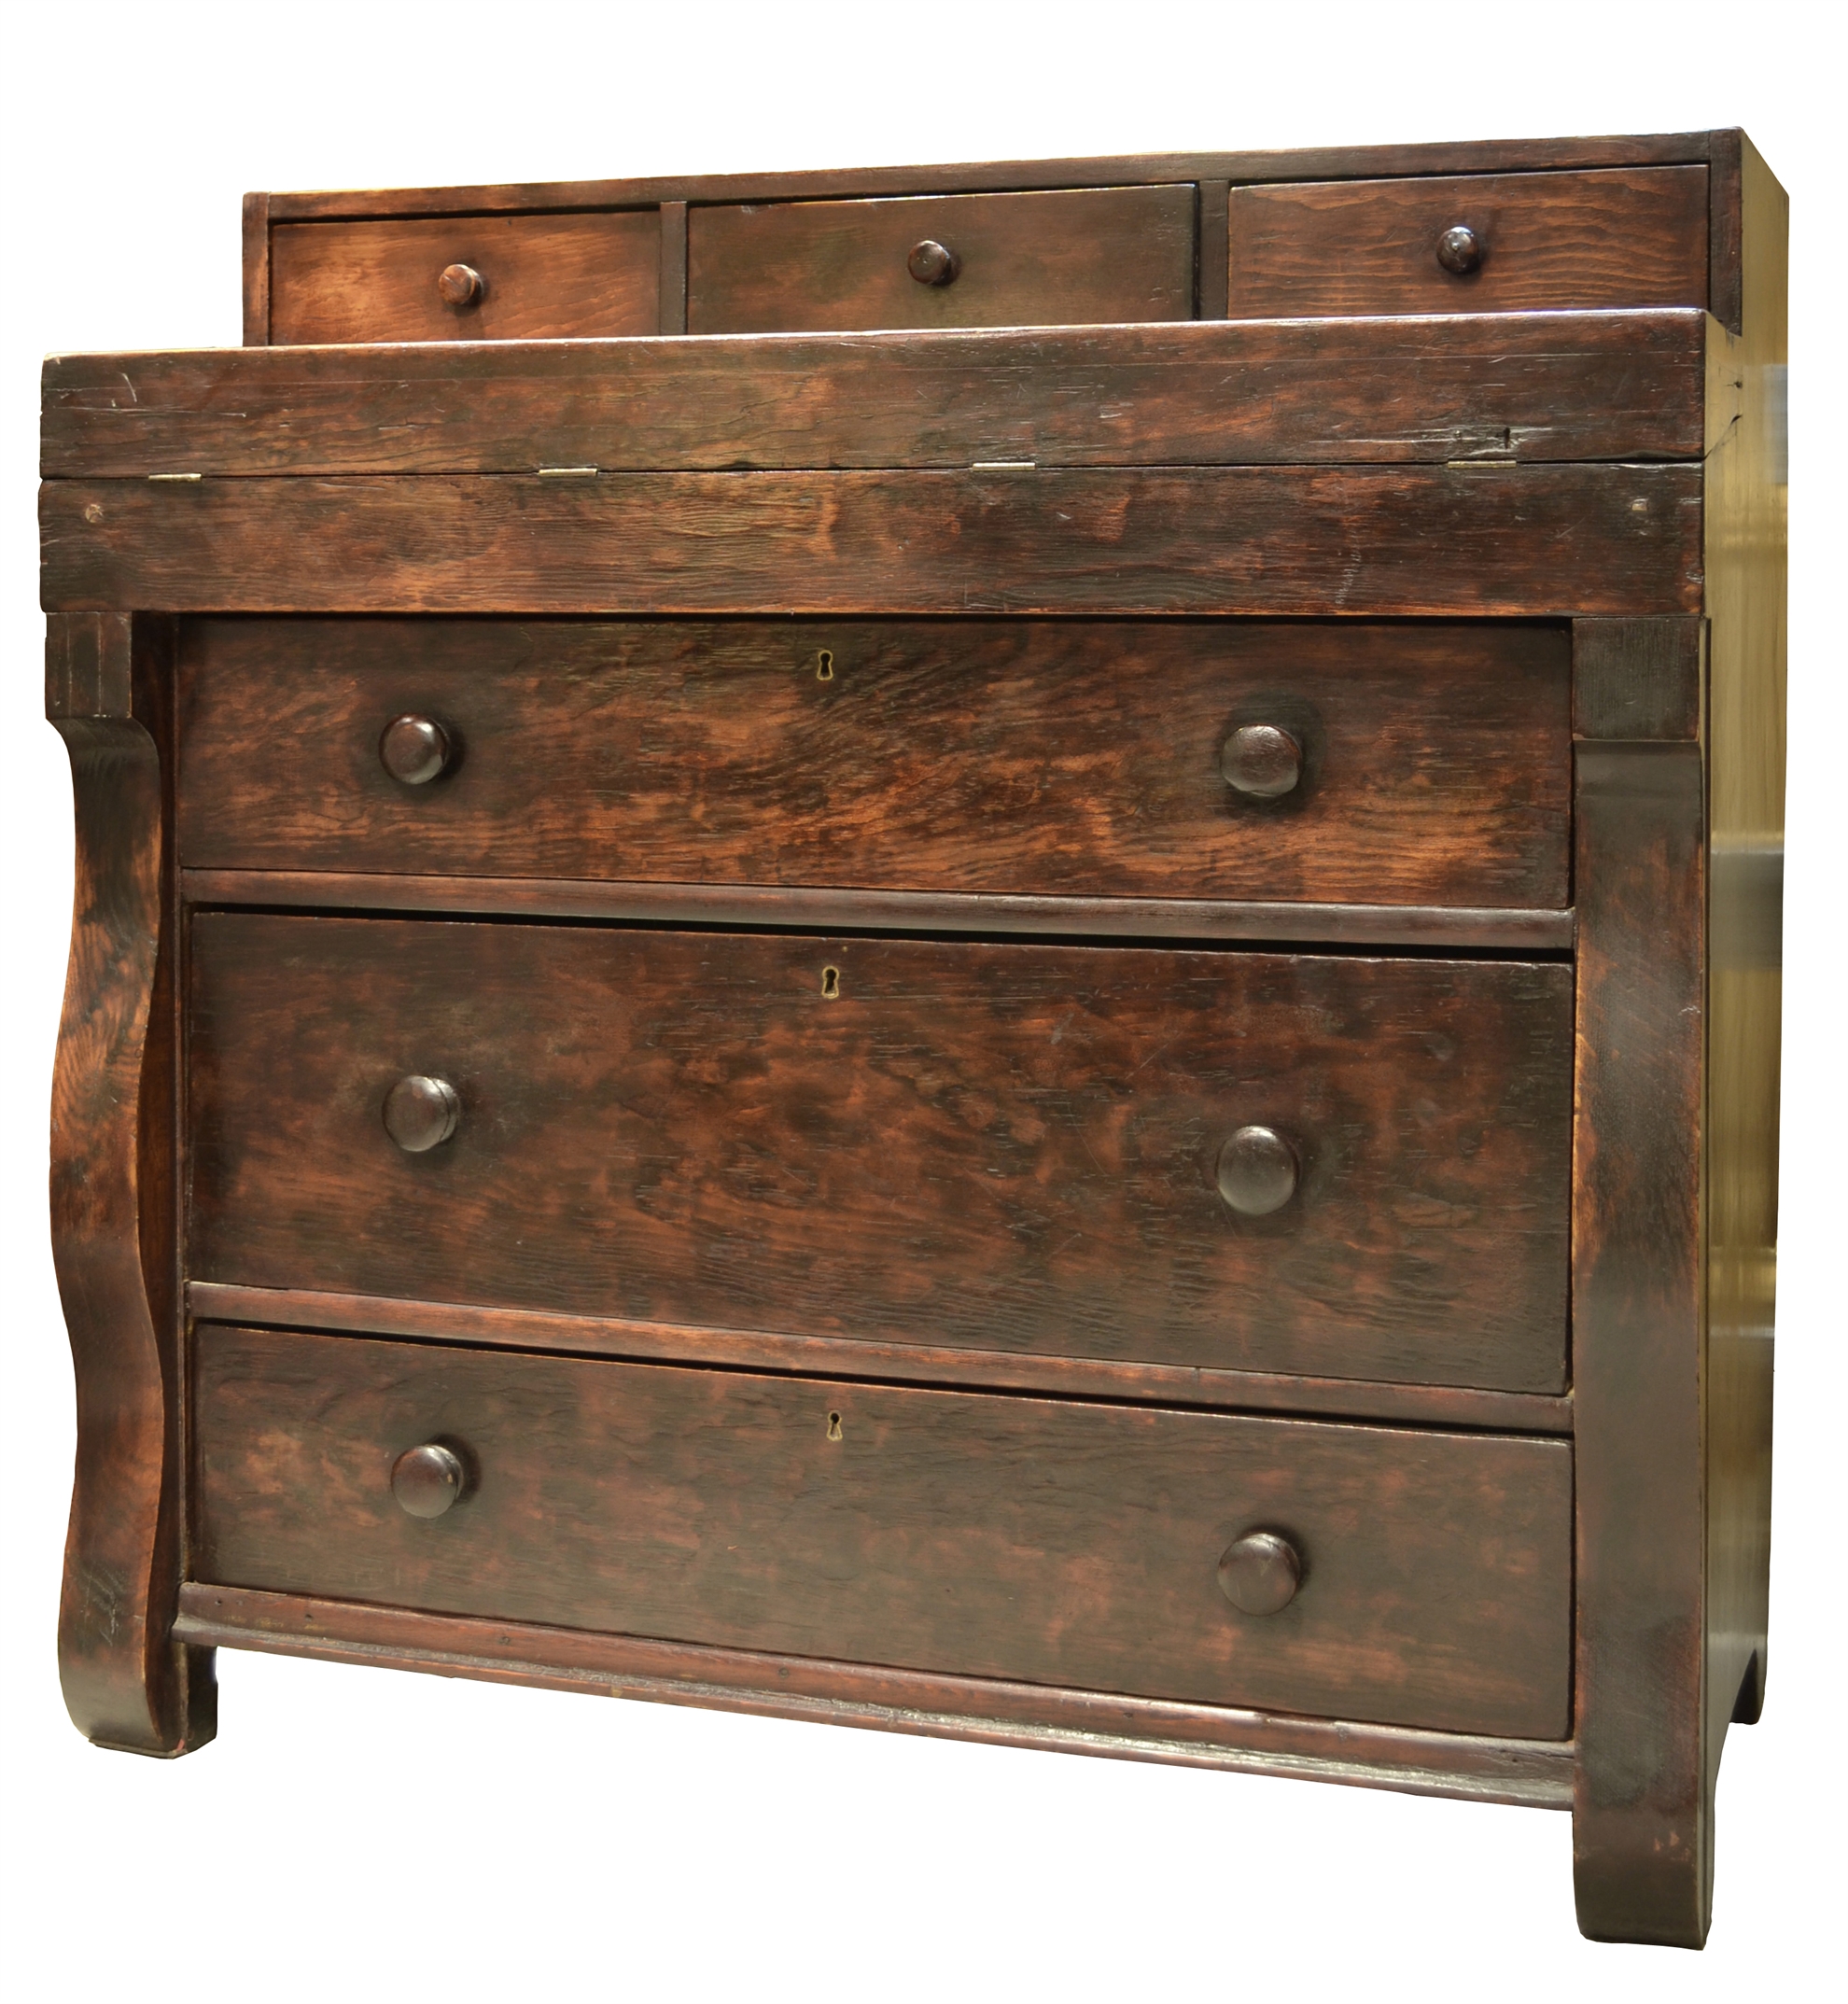 mb/3071 - American Chest of Drawers/ Standing Desk